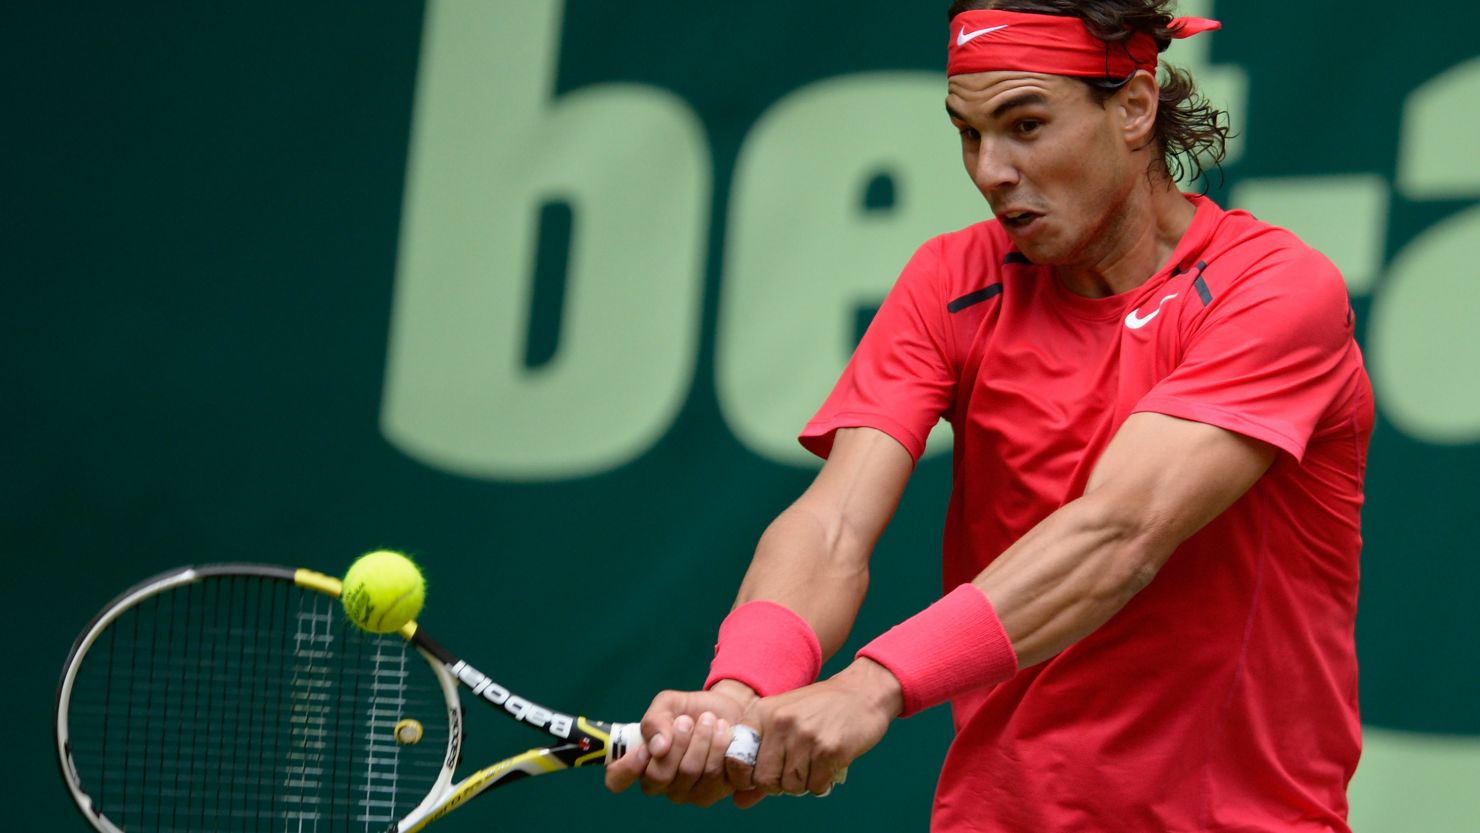 Rafael Nadal is preparing for the Wimbledon championships with his second trip to the grass courts of Halle.